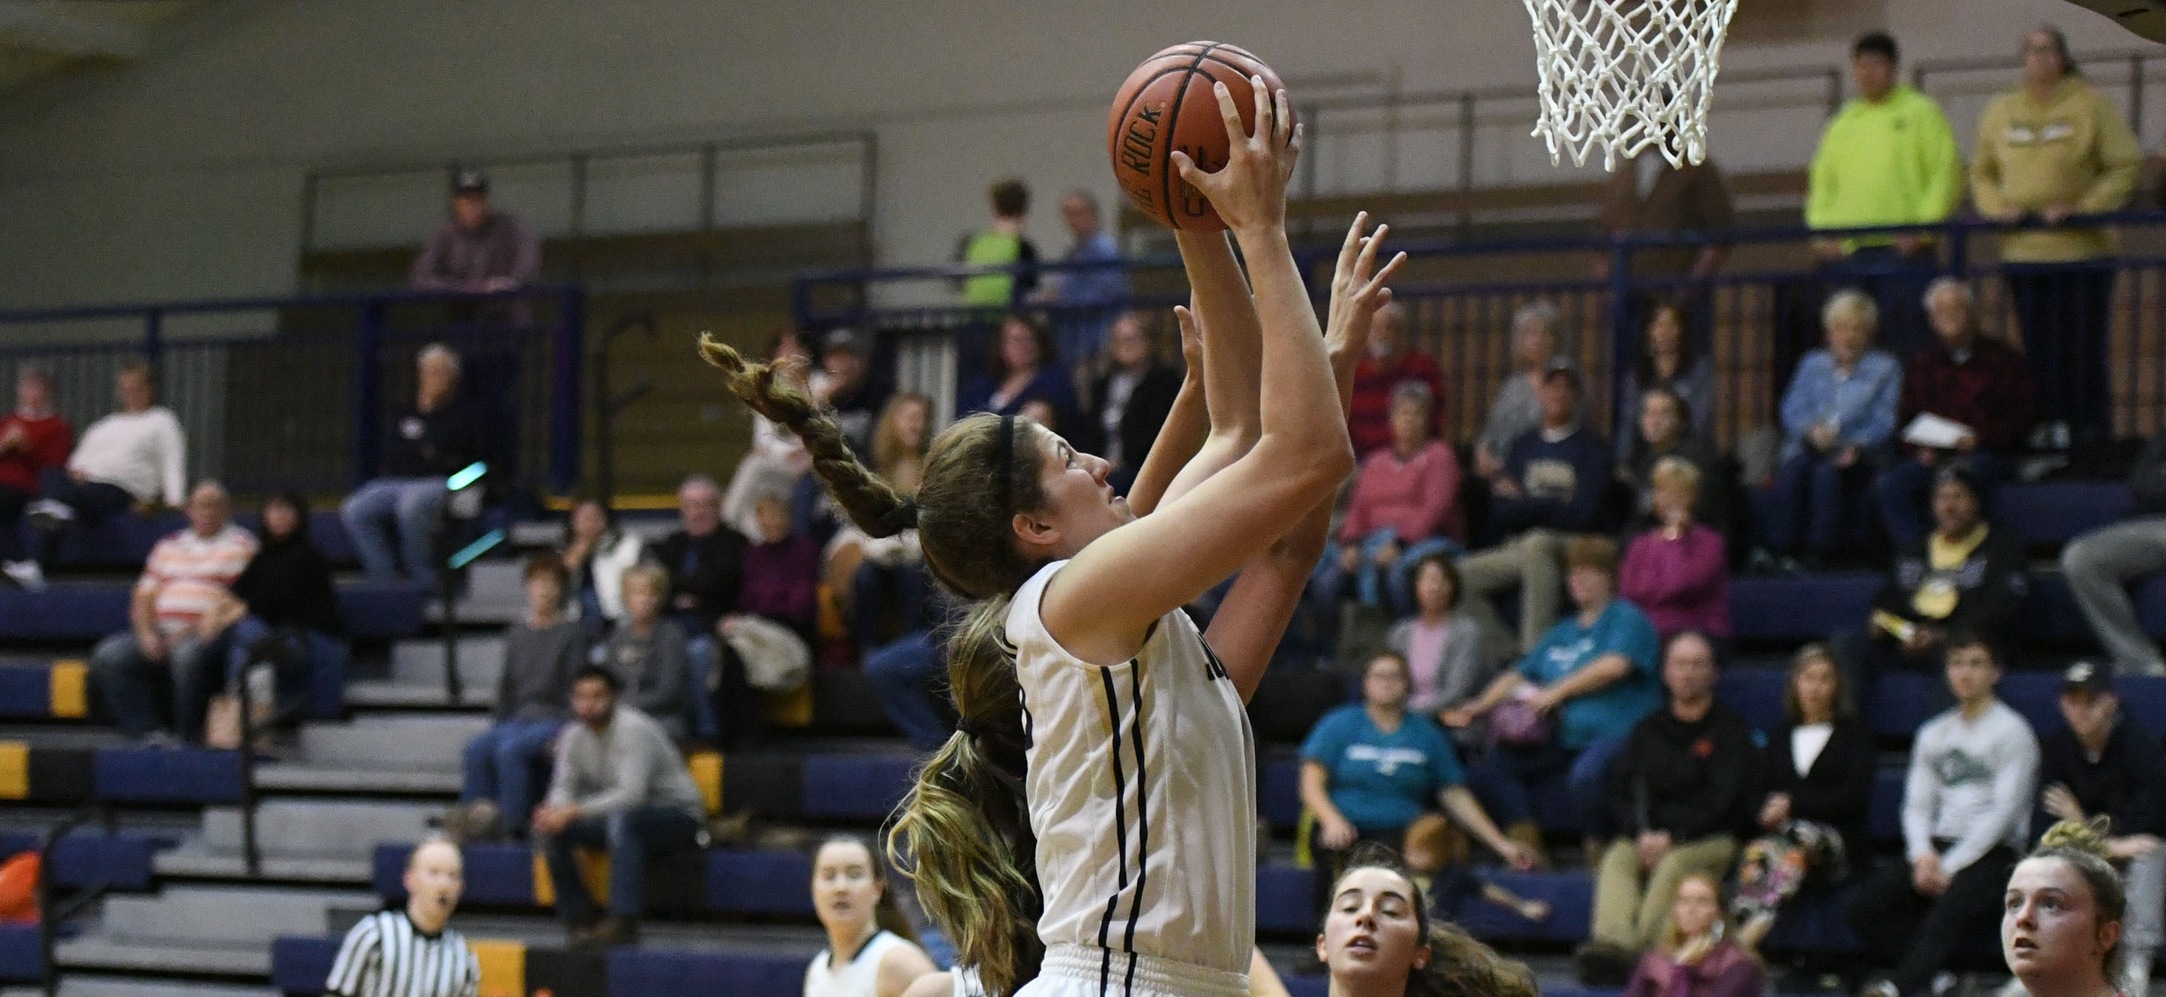 Gracie Stauffer tallied 16 points, 13 rebounds with three blocks and was named to the all-tournament team.